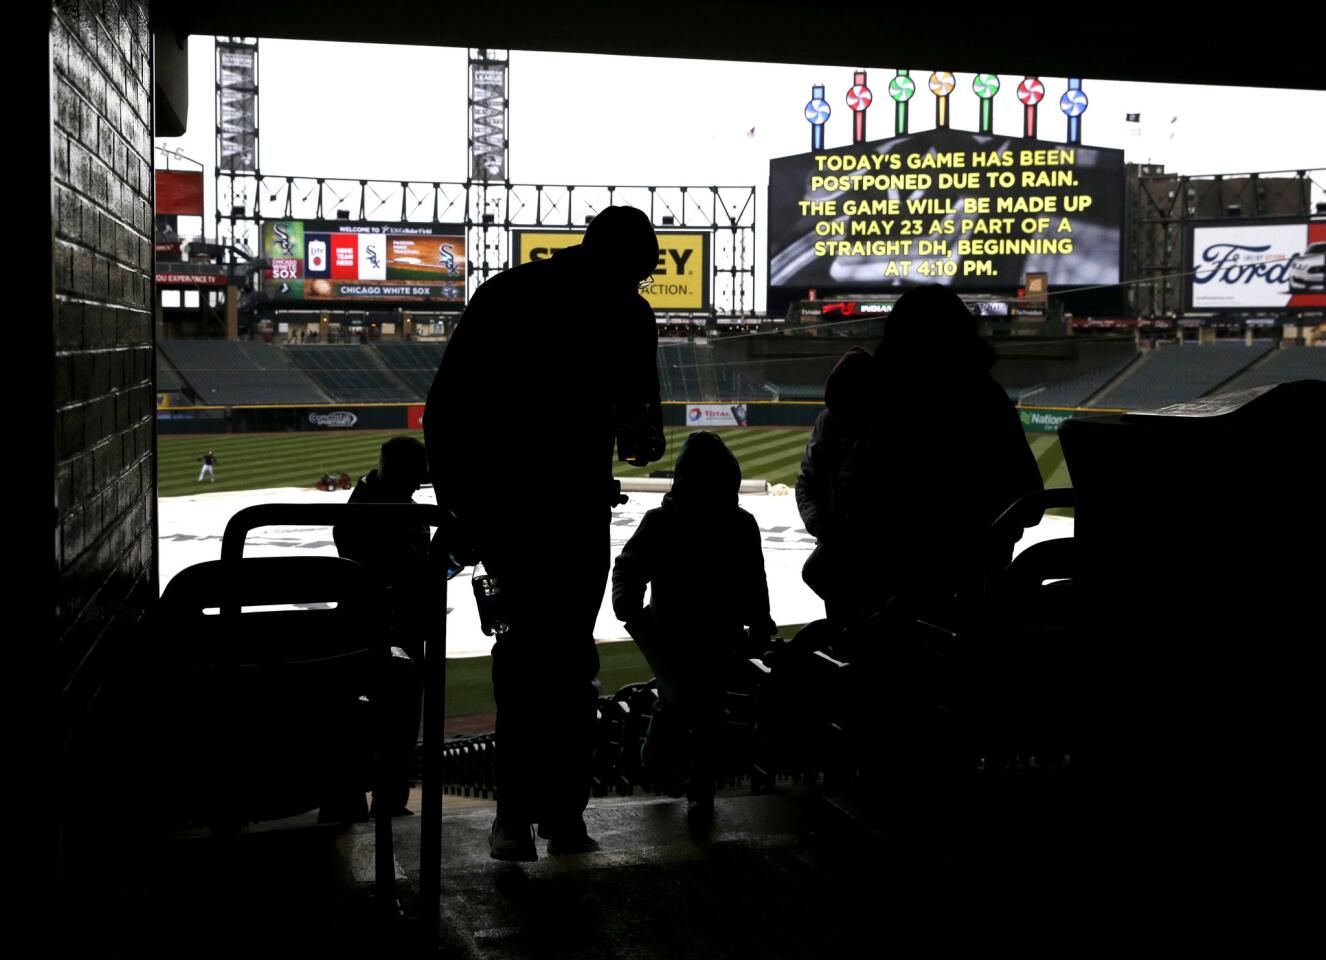 The new video board announces the postponement of a White Sox-Indians game at U.S. Cellular Field on April 10, 2016.